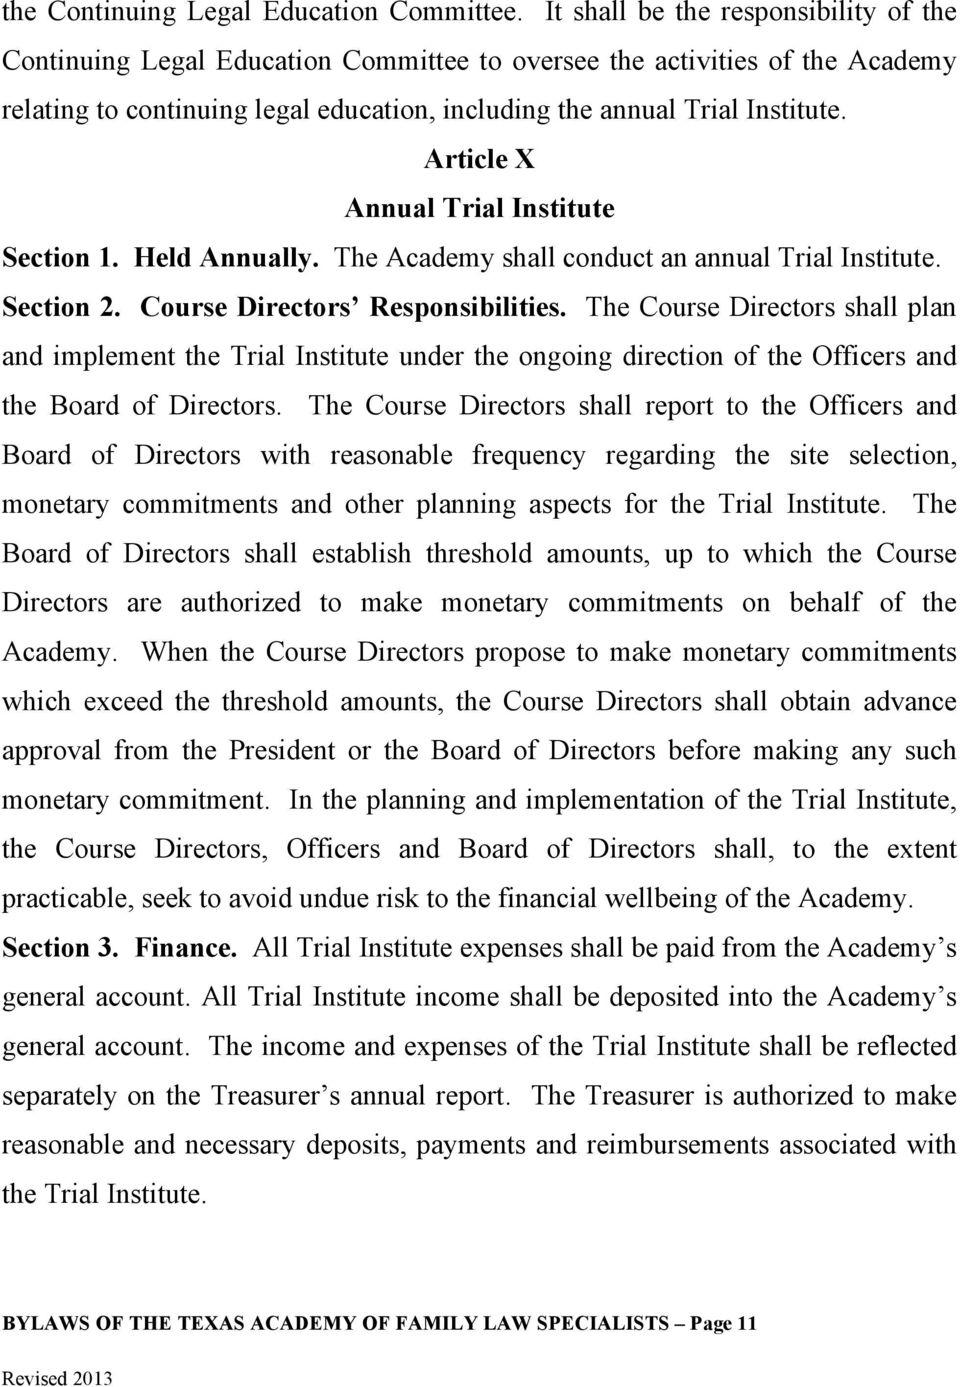 Article X Annual Trial Institute Section 1. Held Annually. The Academy shall conduct an annual Trial Institute. Section 2. Course Directors Responsibilities.